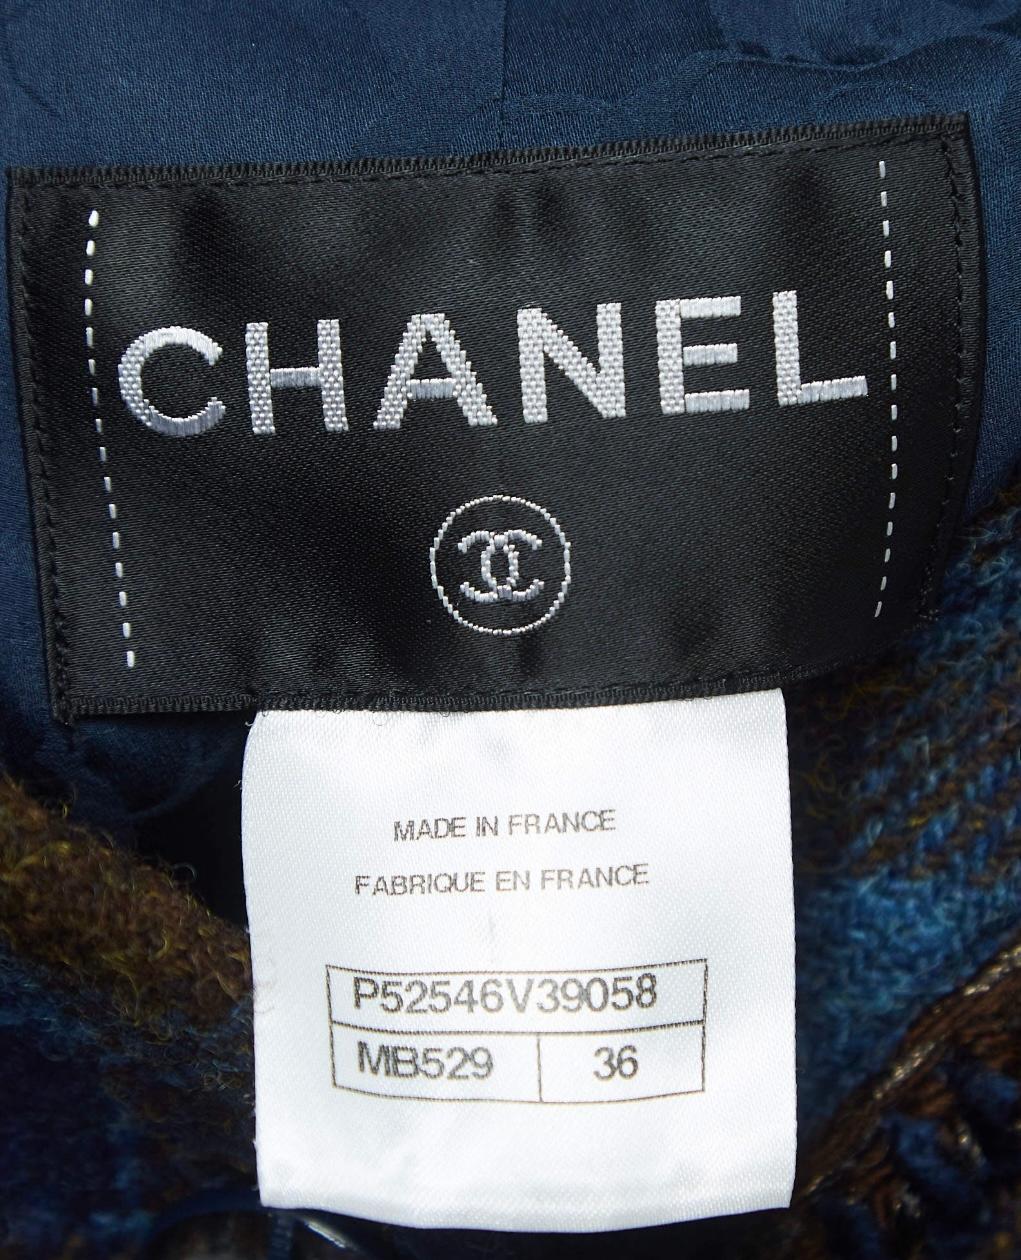 Chanel New Coco Brasserie Runway Suit 2